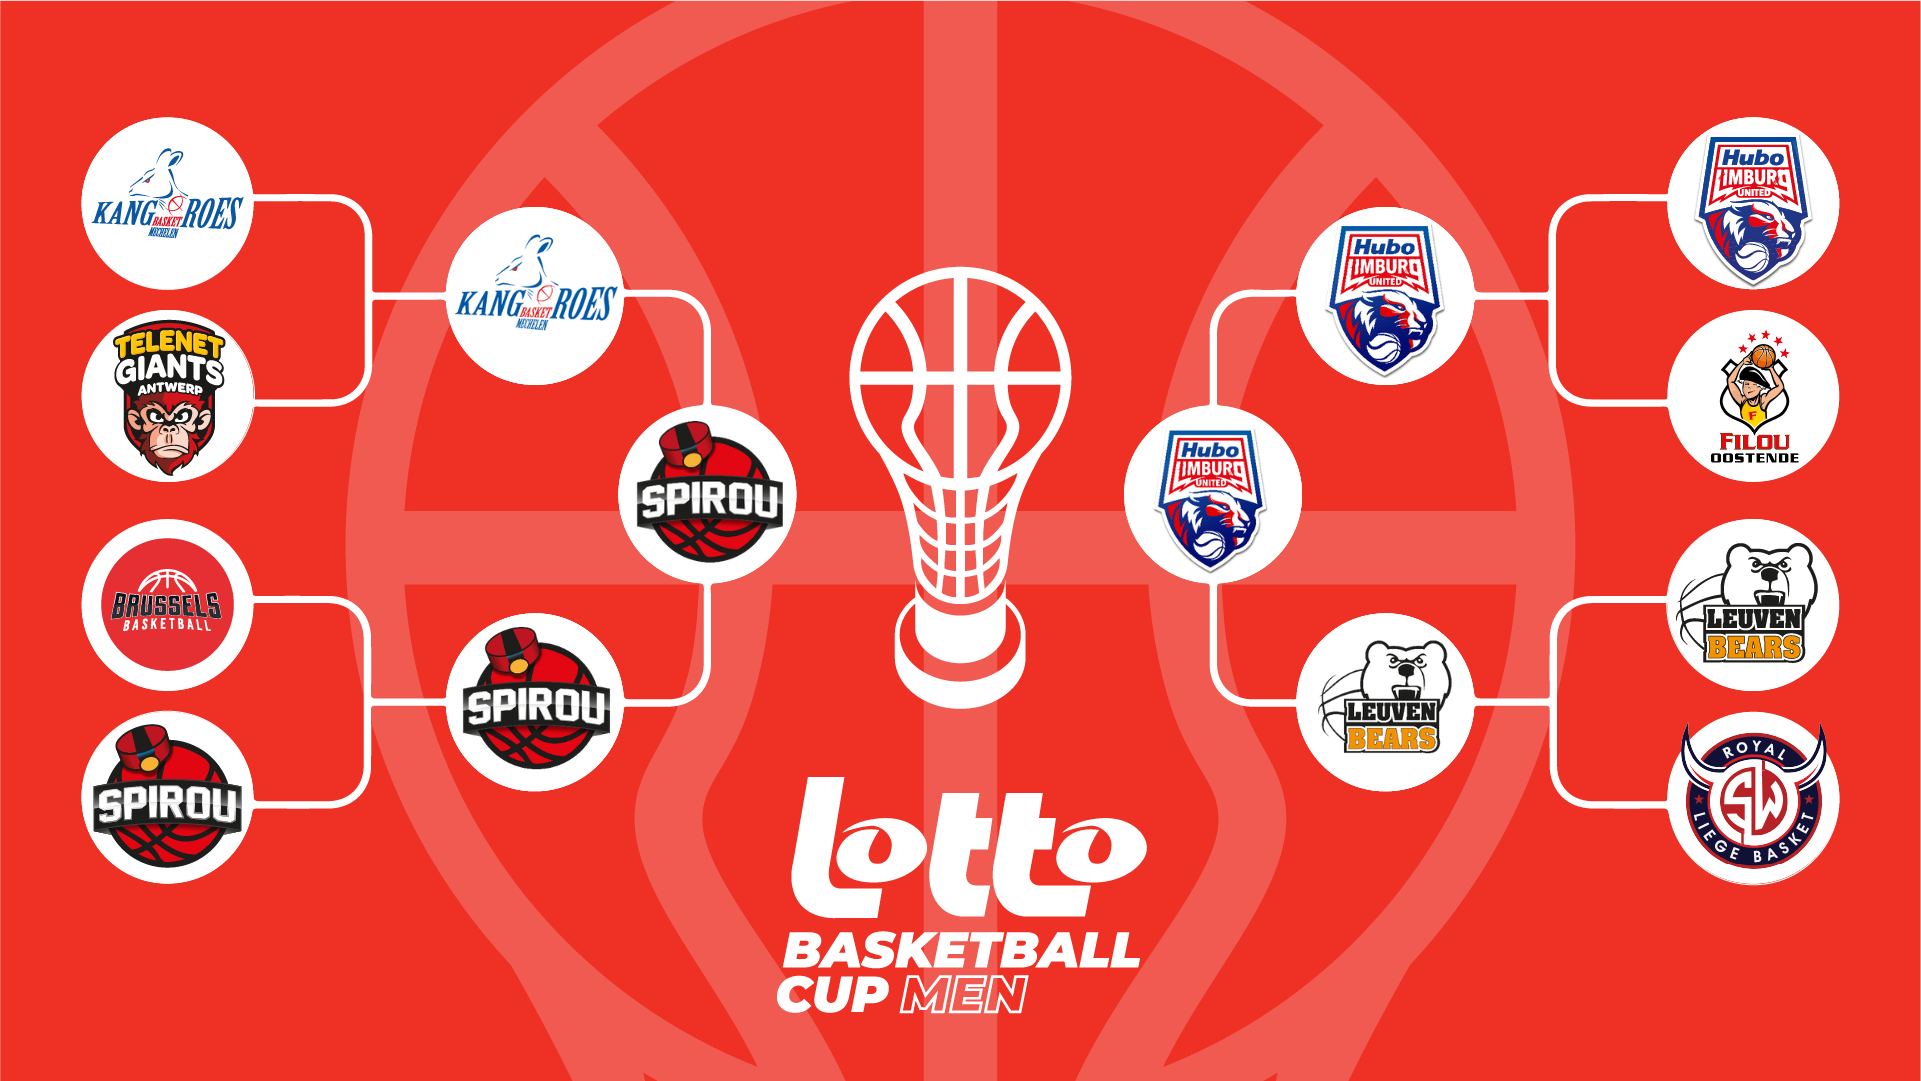 Lotto Cup brackets